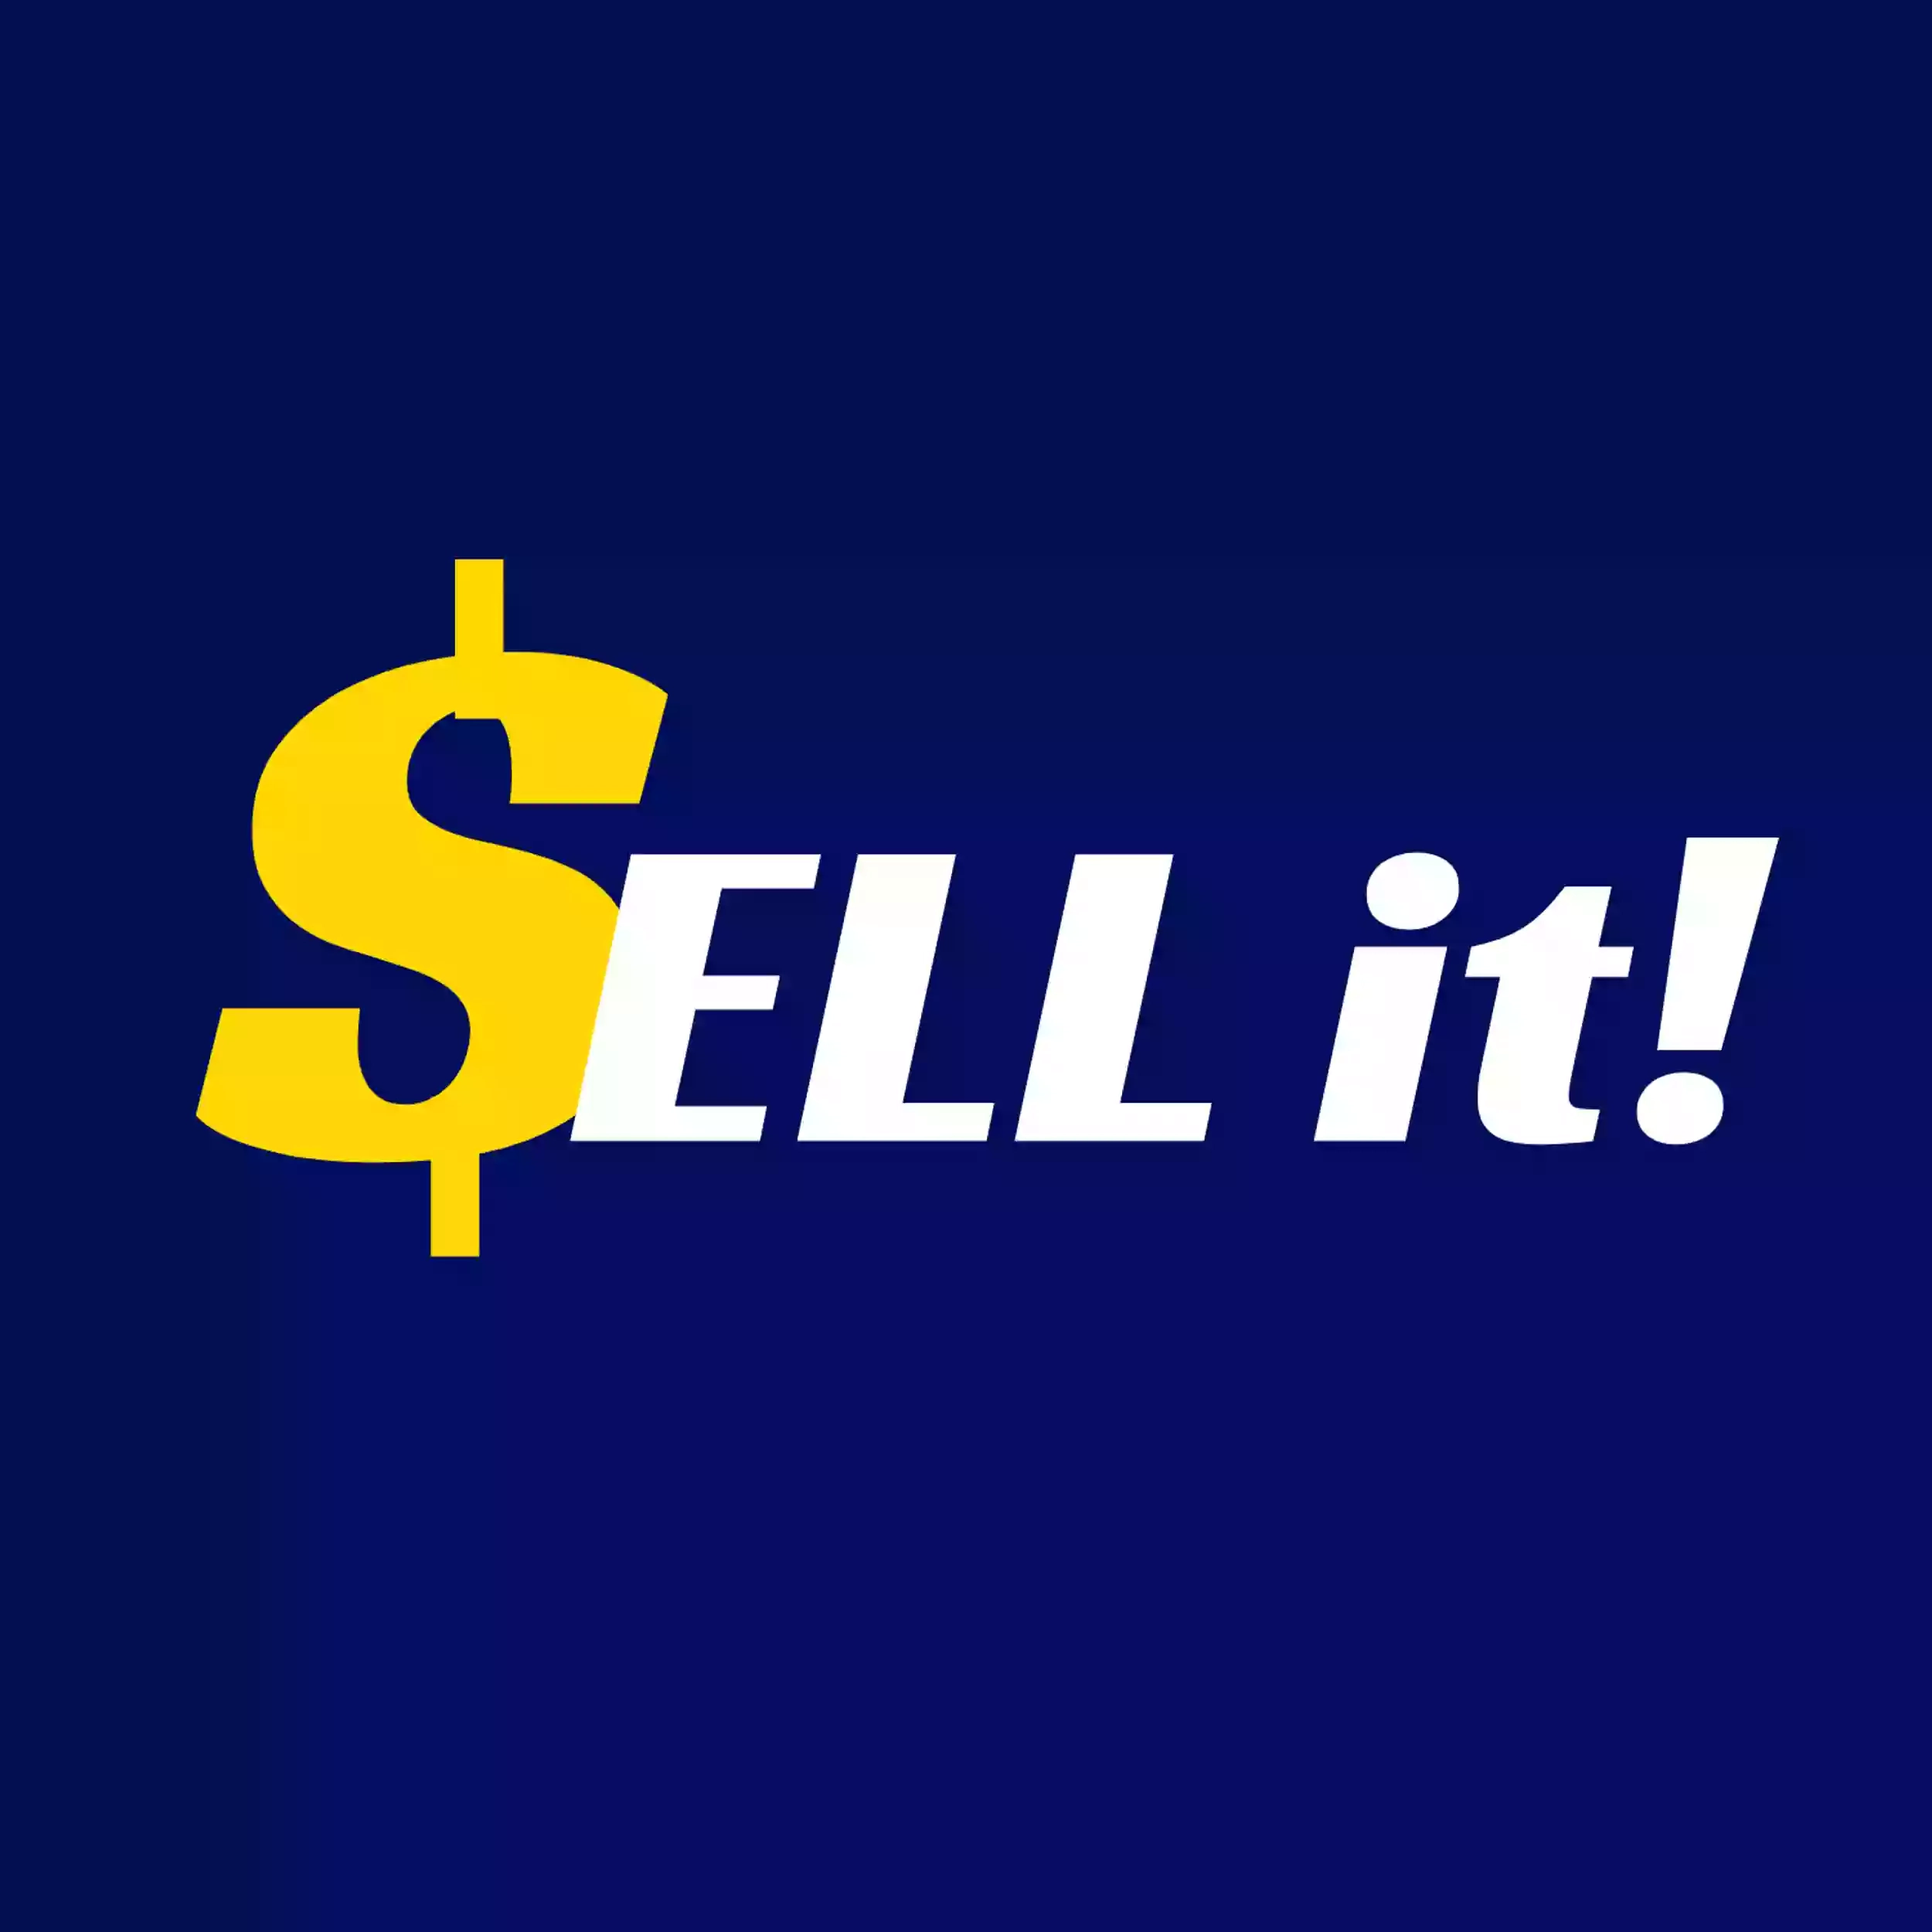 Sell it!